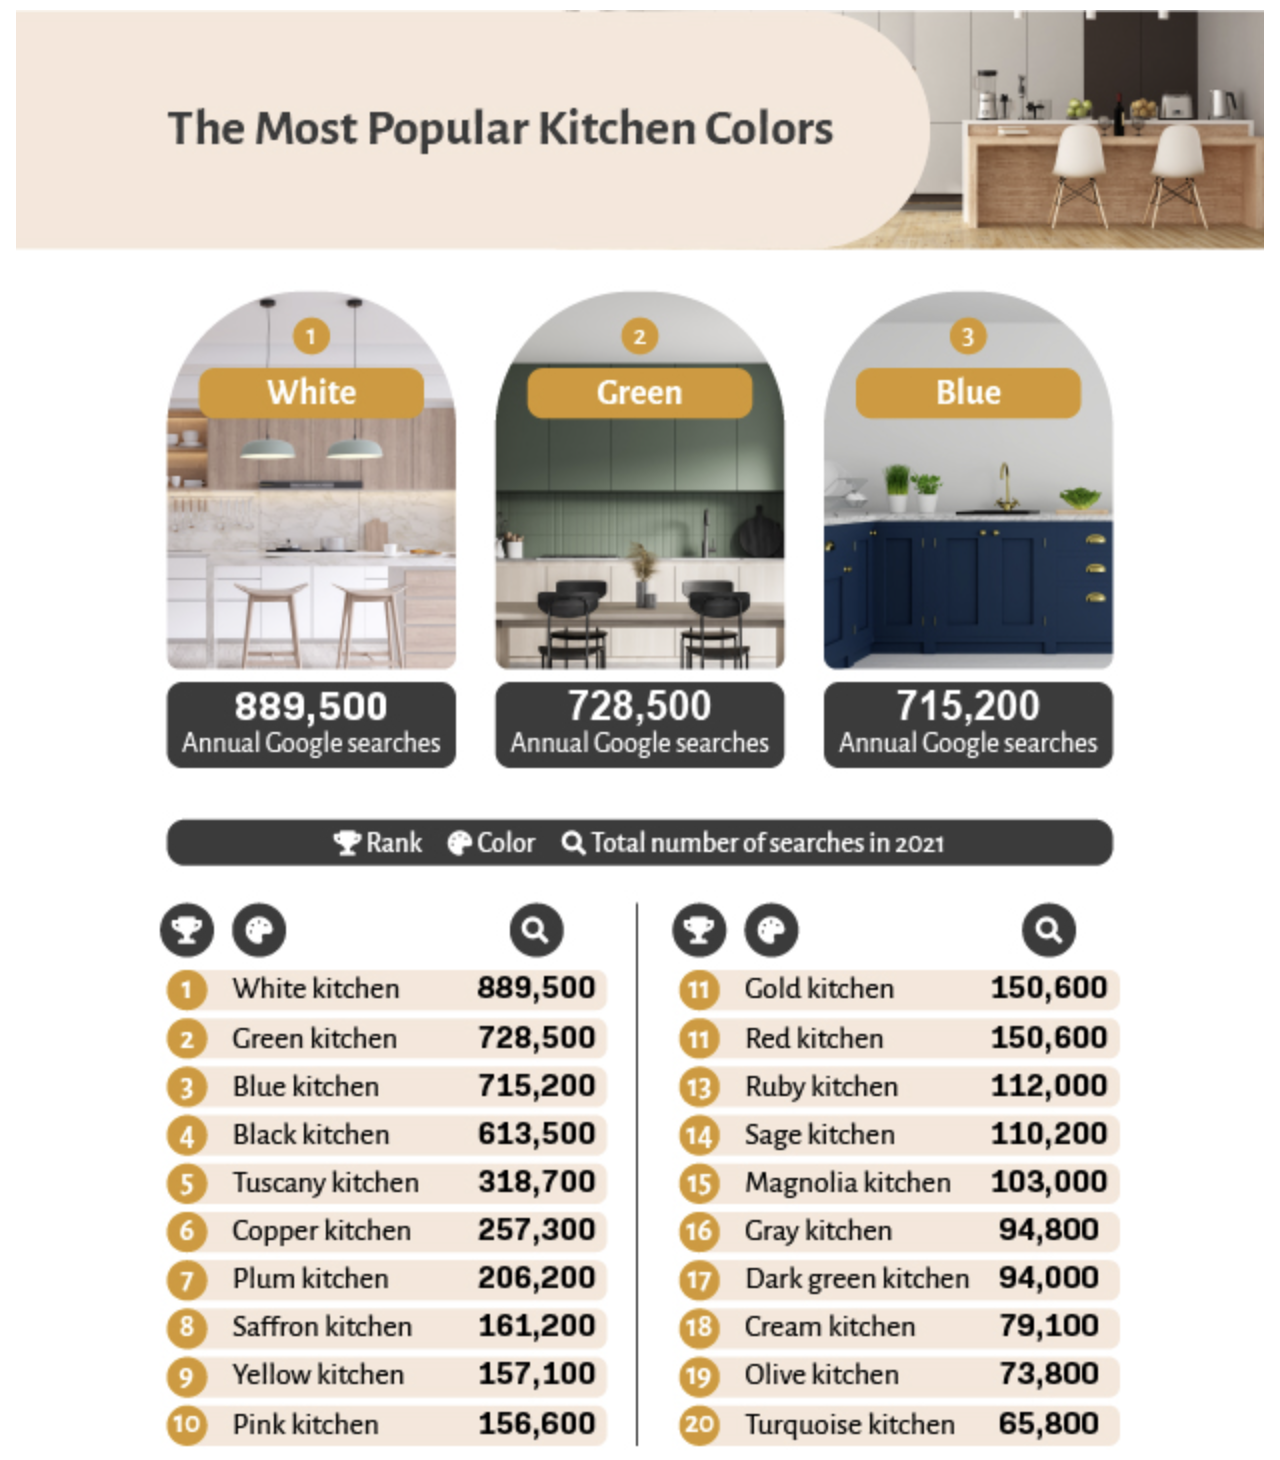 A visual list of the most popular kitchen colors, the top three being white, green, and blue.